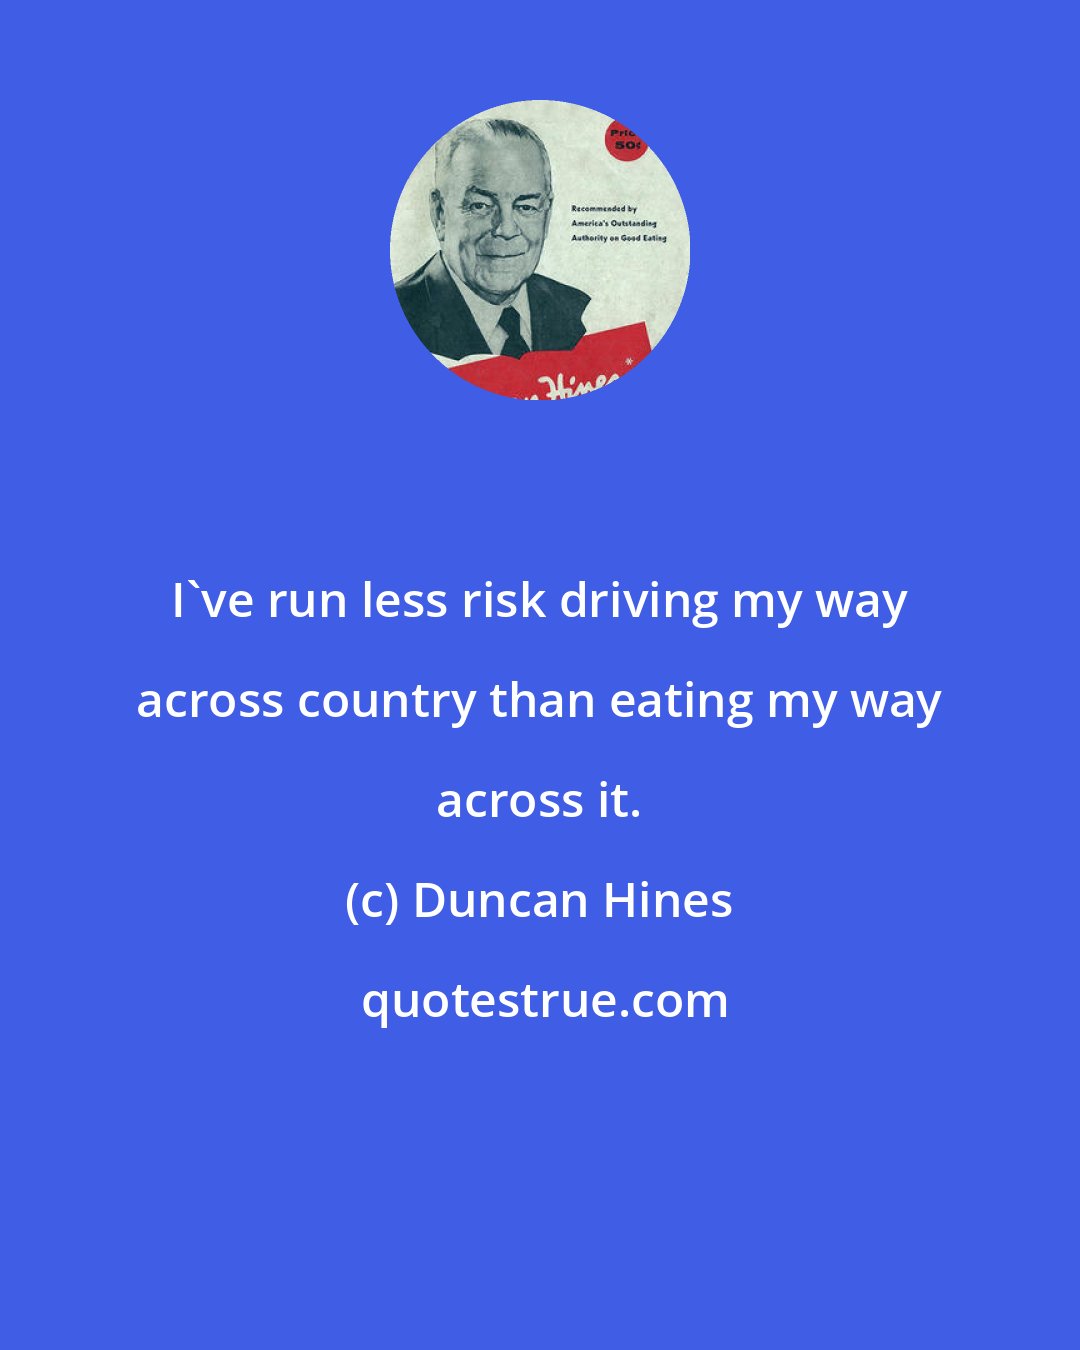 Duncan Hines: I've run less risk driving my way across country than eating my way across it.